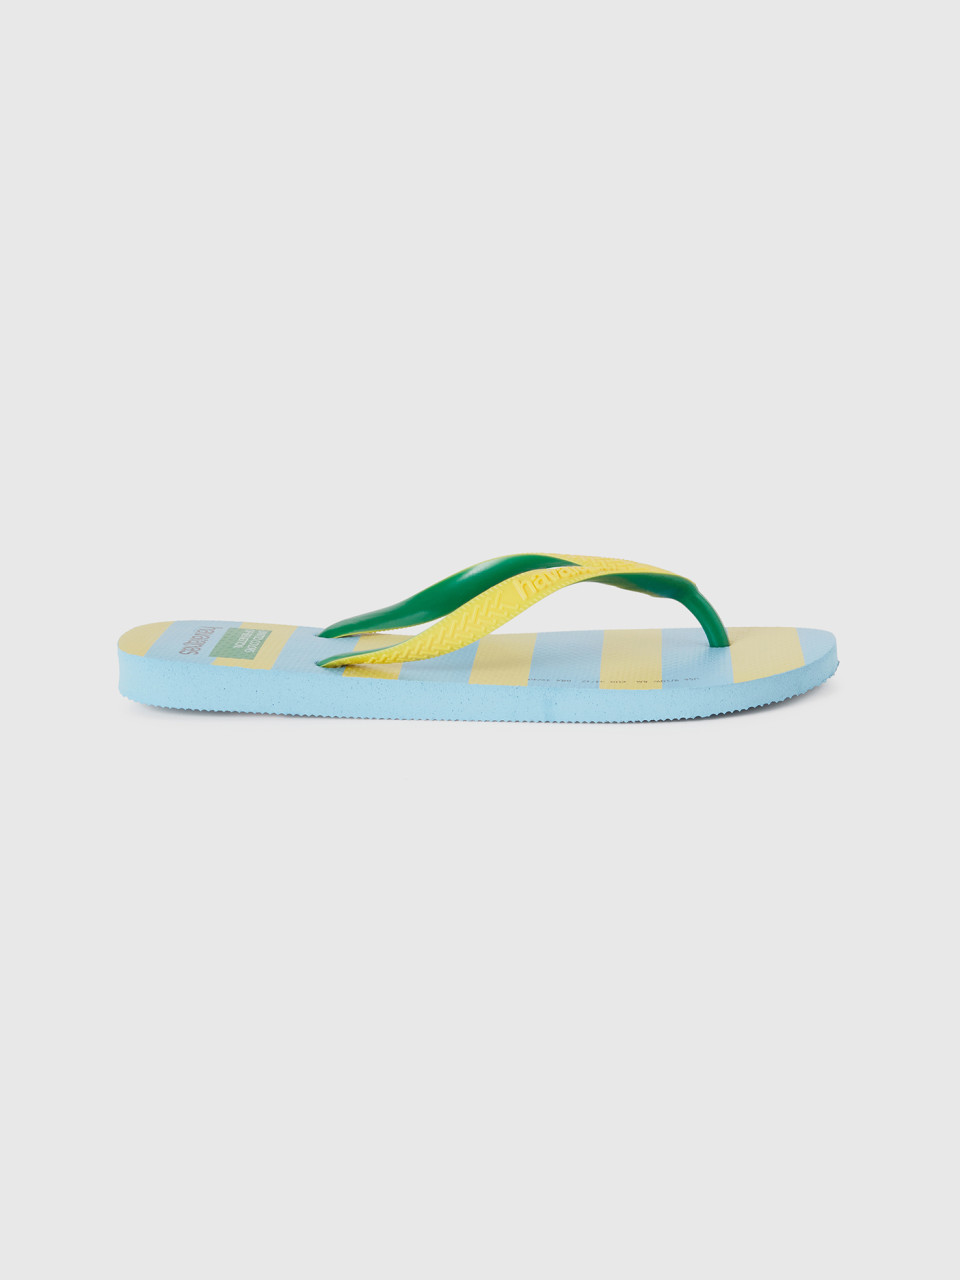 Benetton, Havaianas Flip Flops With Yellow And Light Blue Stripes, Multi-color, Women